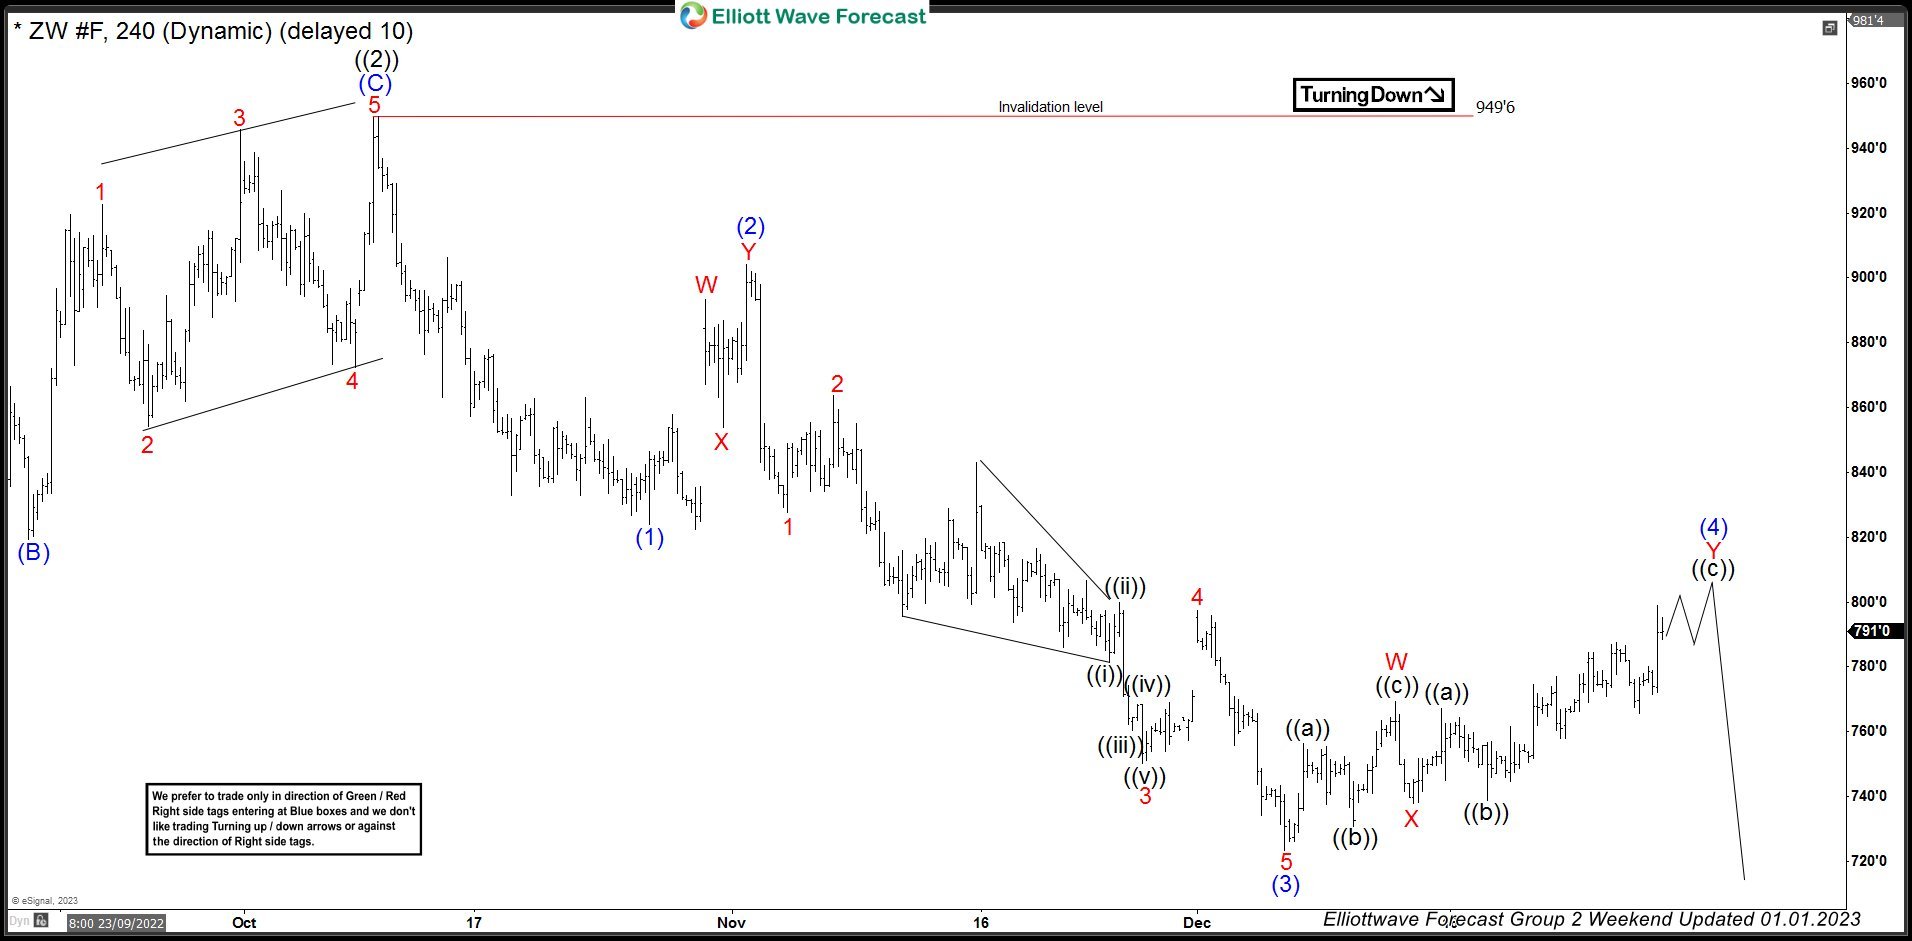 Wheat ($ZW_F) Forecasting The Decline After Elliott Wave Double Three